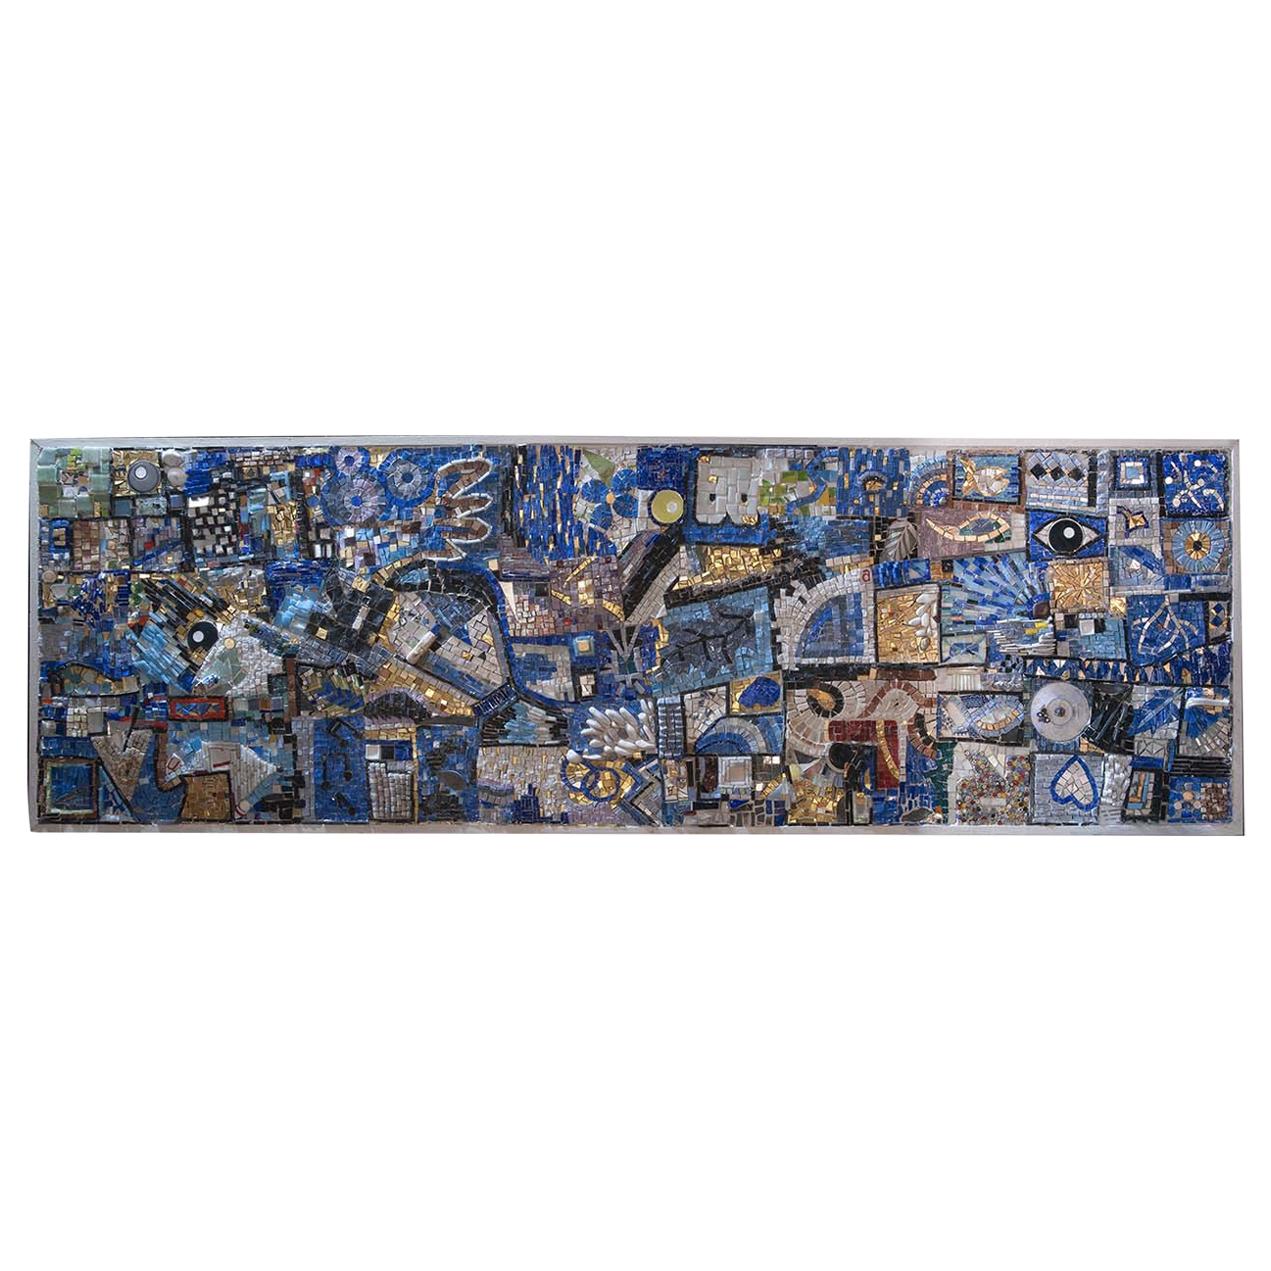 Where Is My Mind? Decorative Panel by Mosaici Ursula Corsi